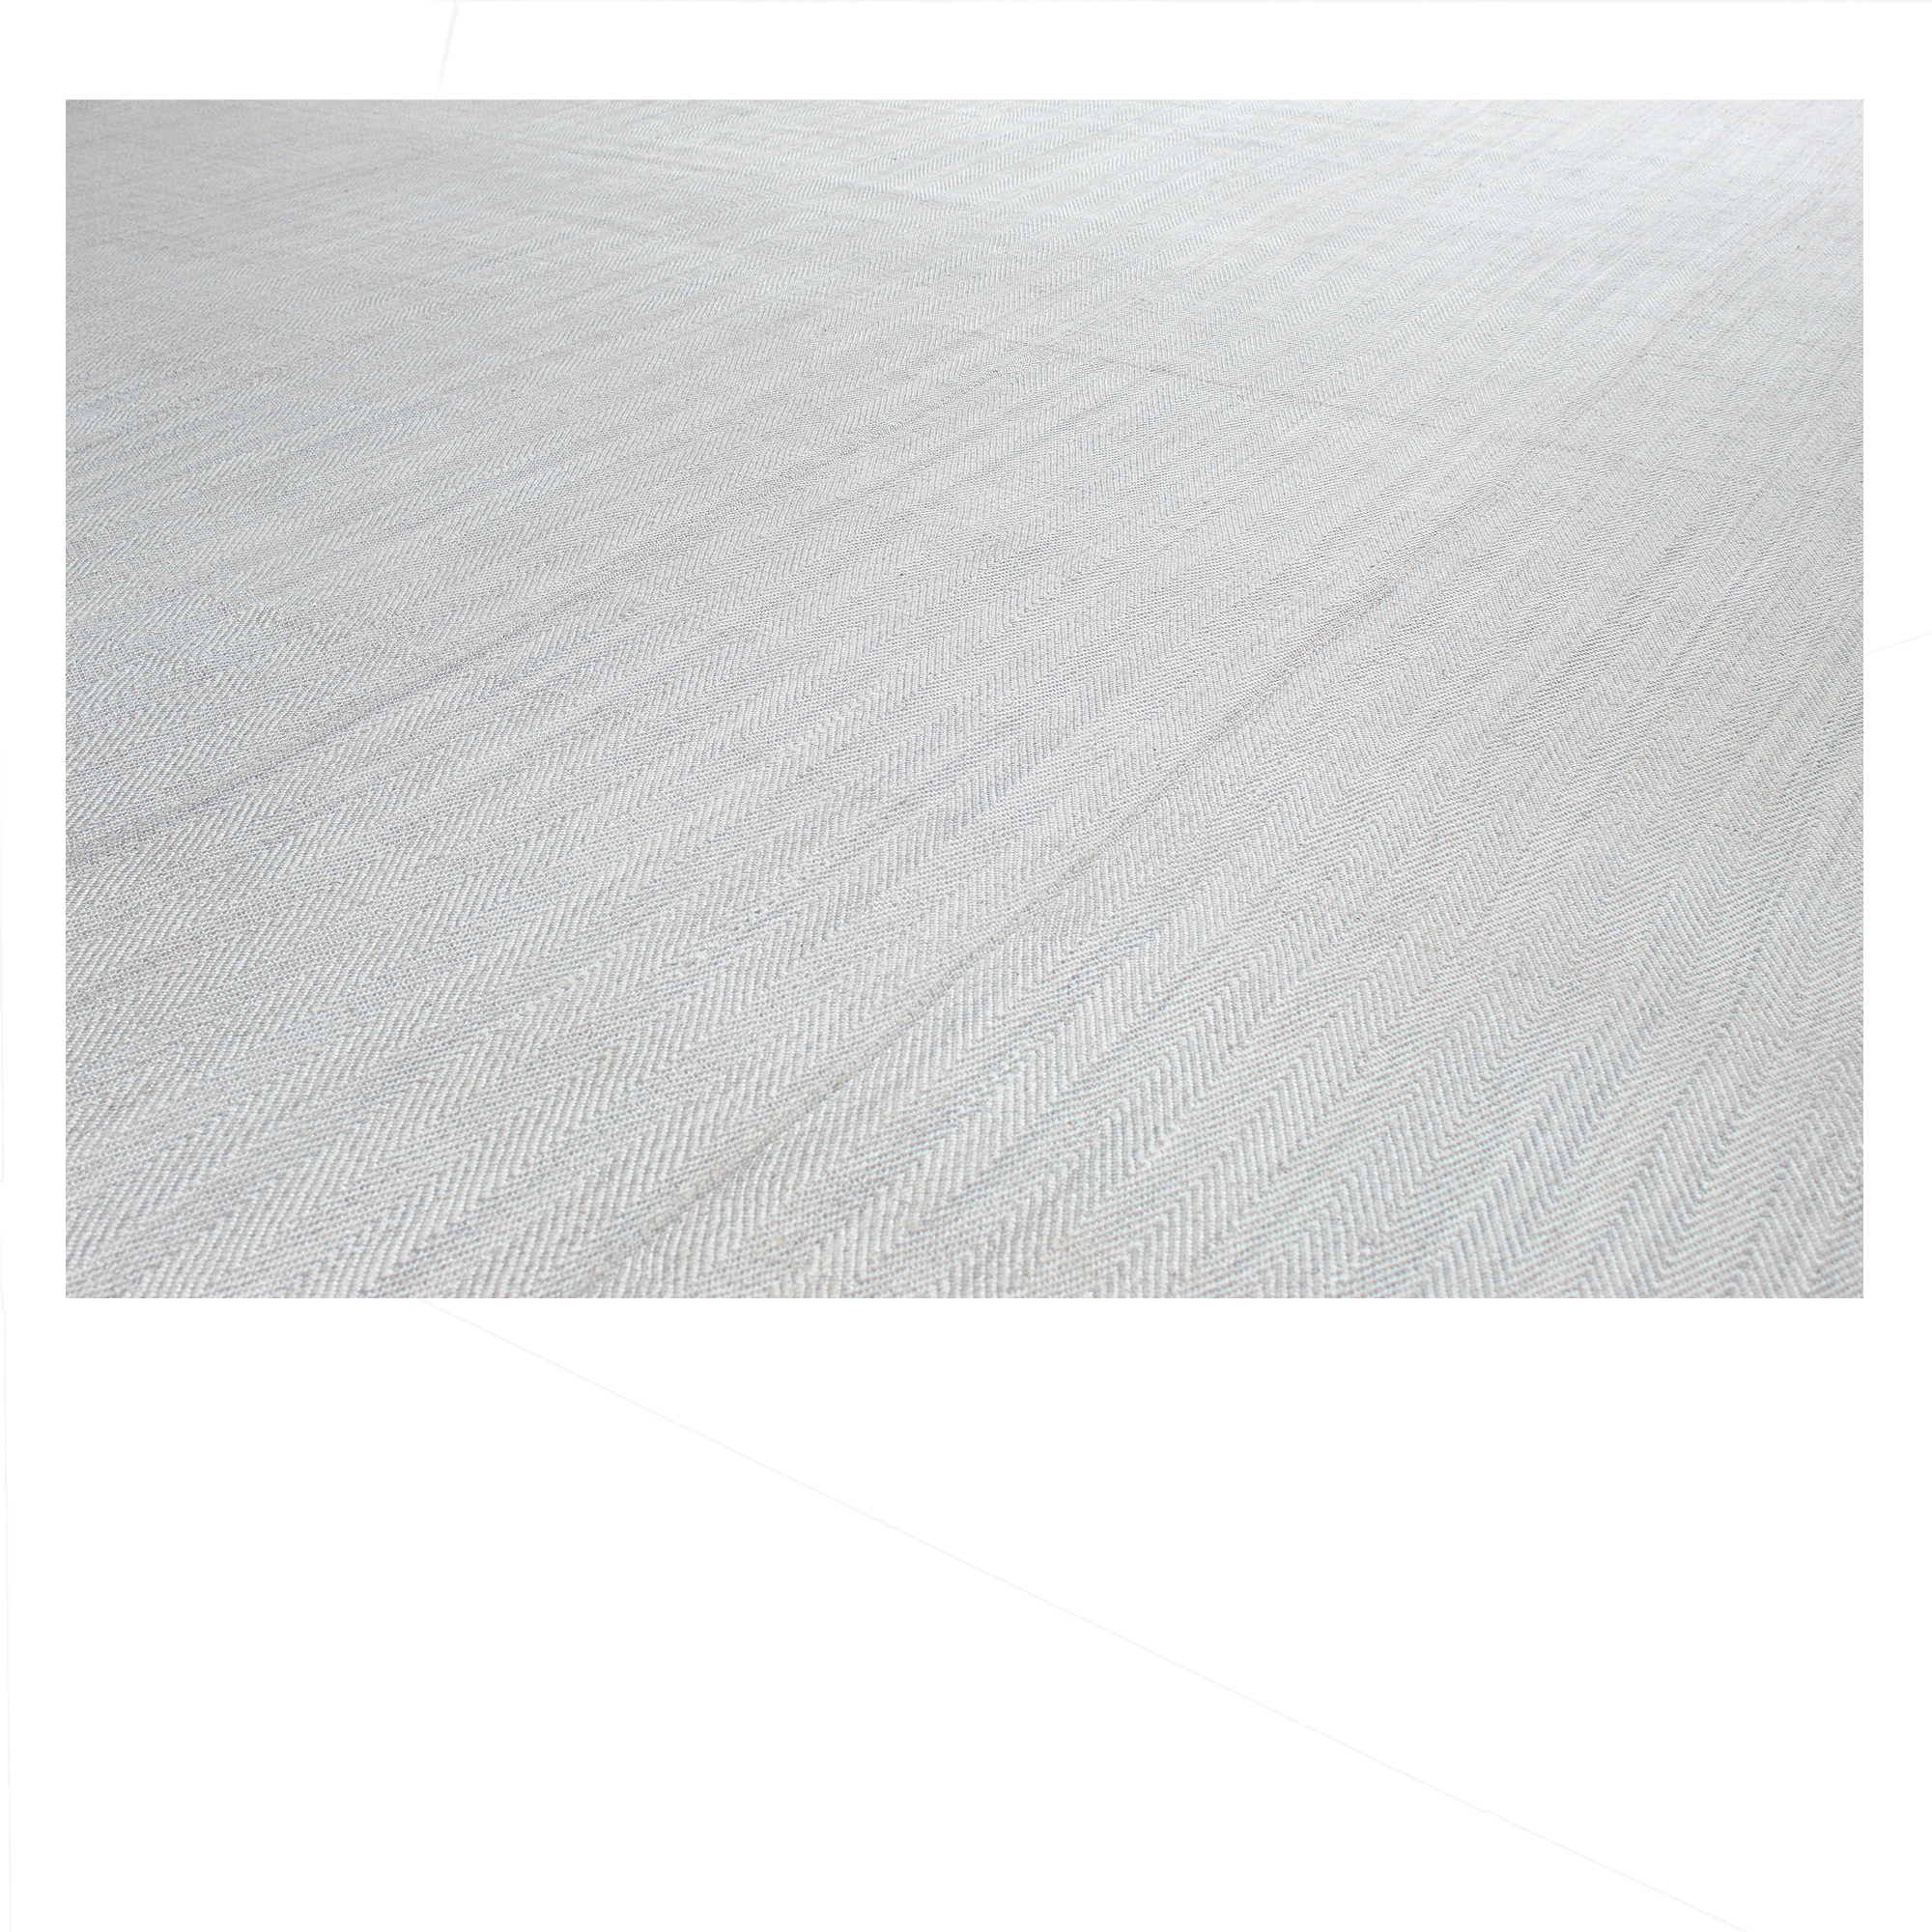 Herringbone rug is a hand-knotted transitional piece composed of hand-spun naturally dyed wool. 